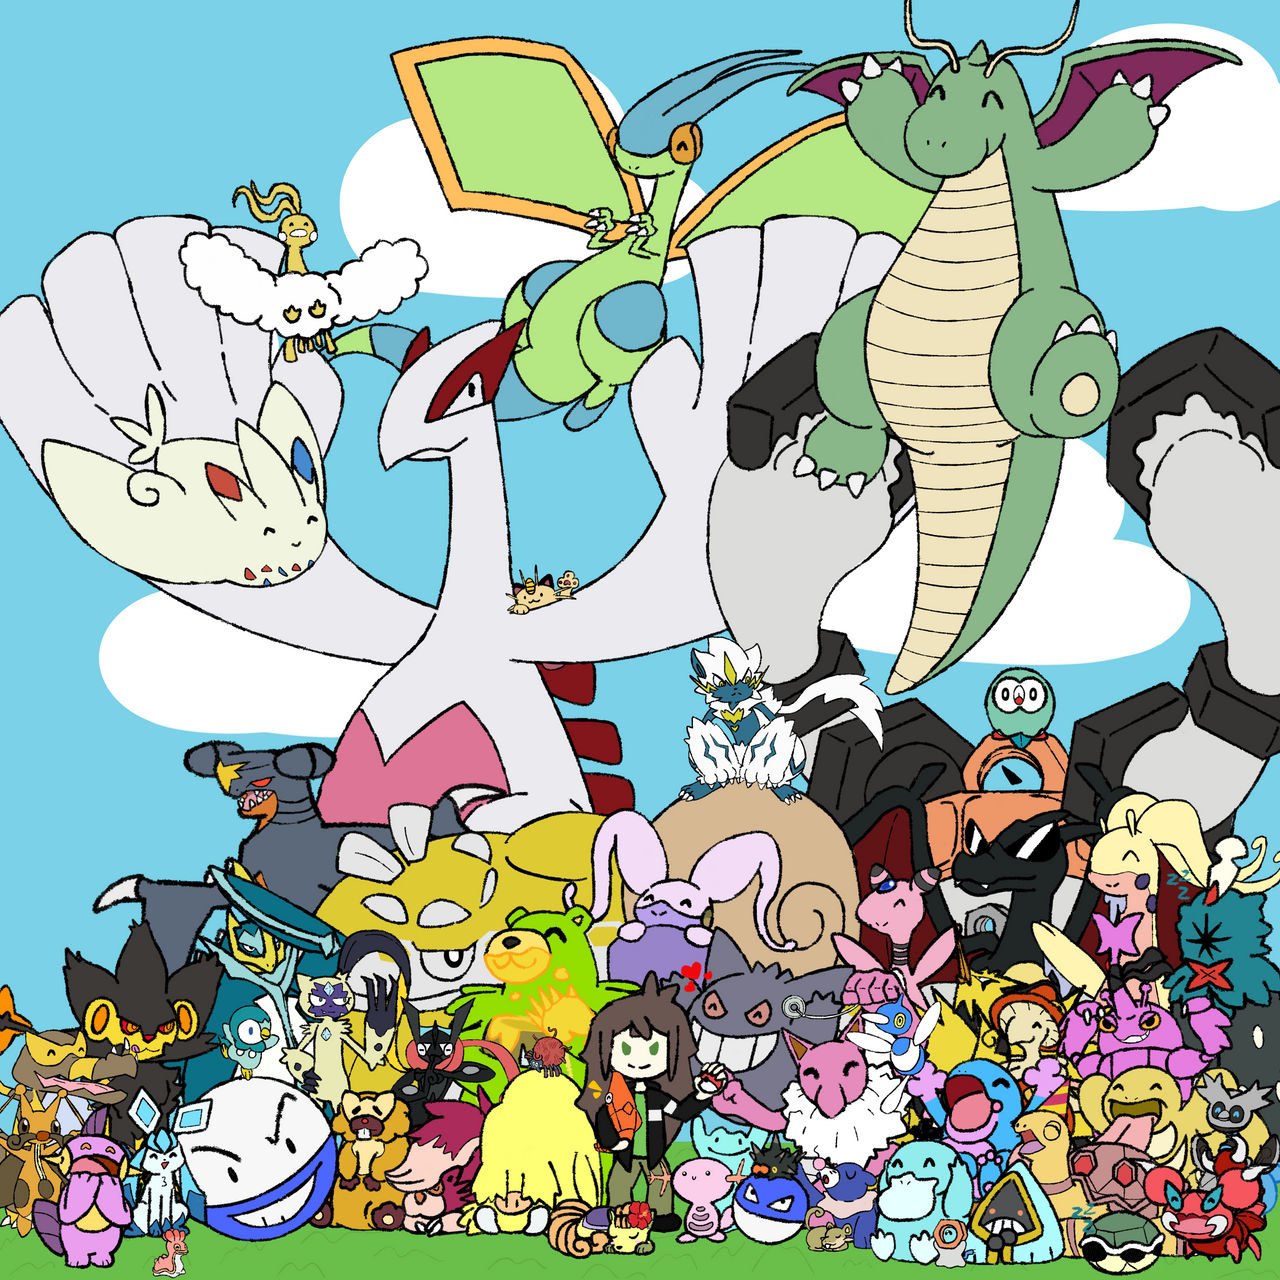 Dragons of Alola by SpinoOne on DeviantArt